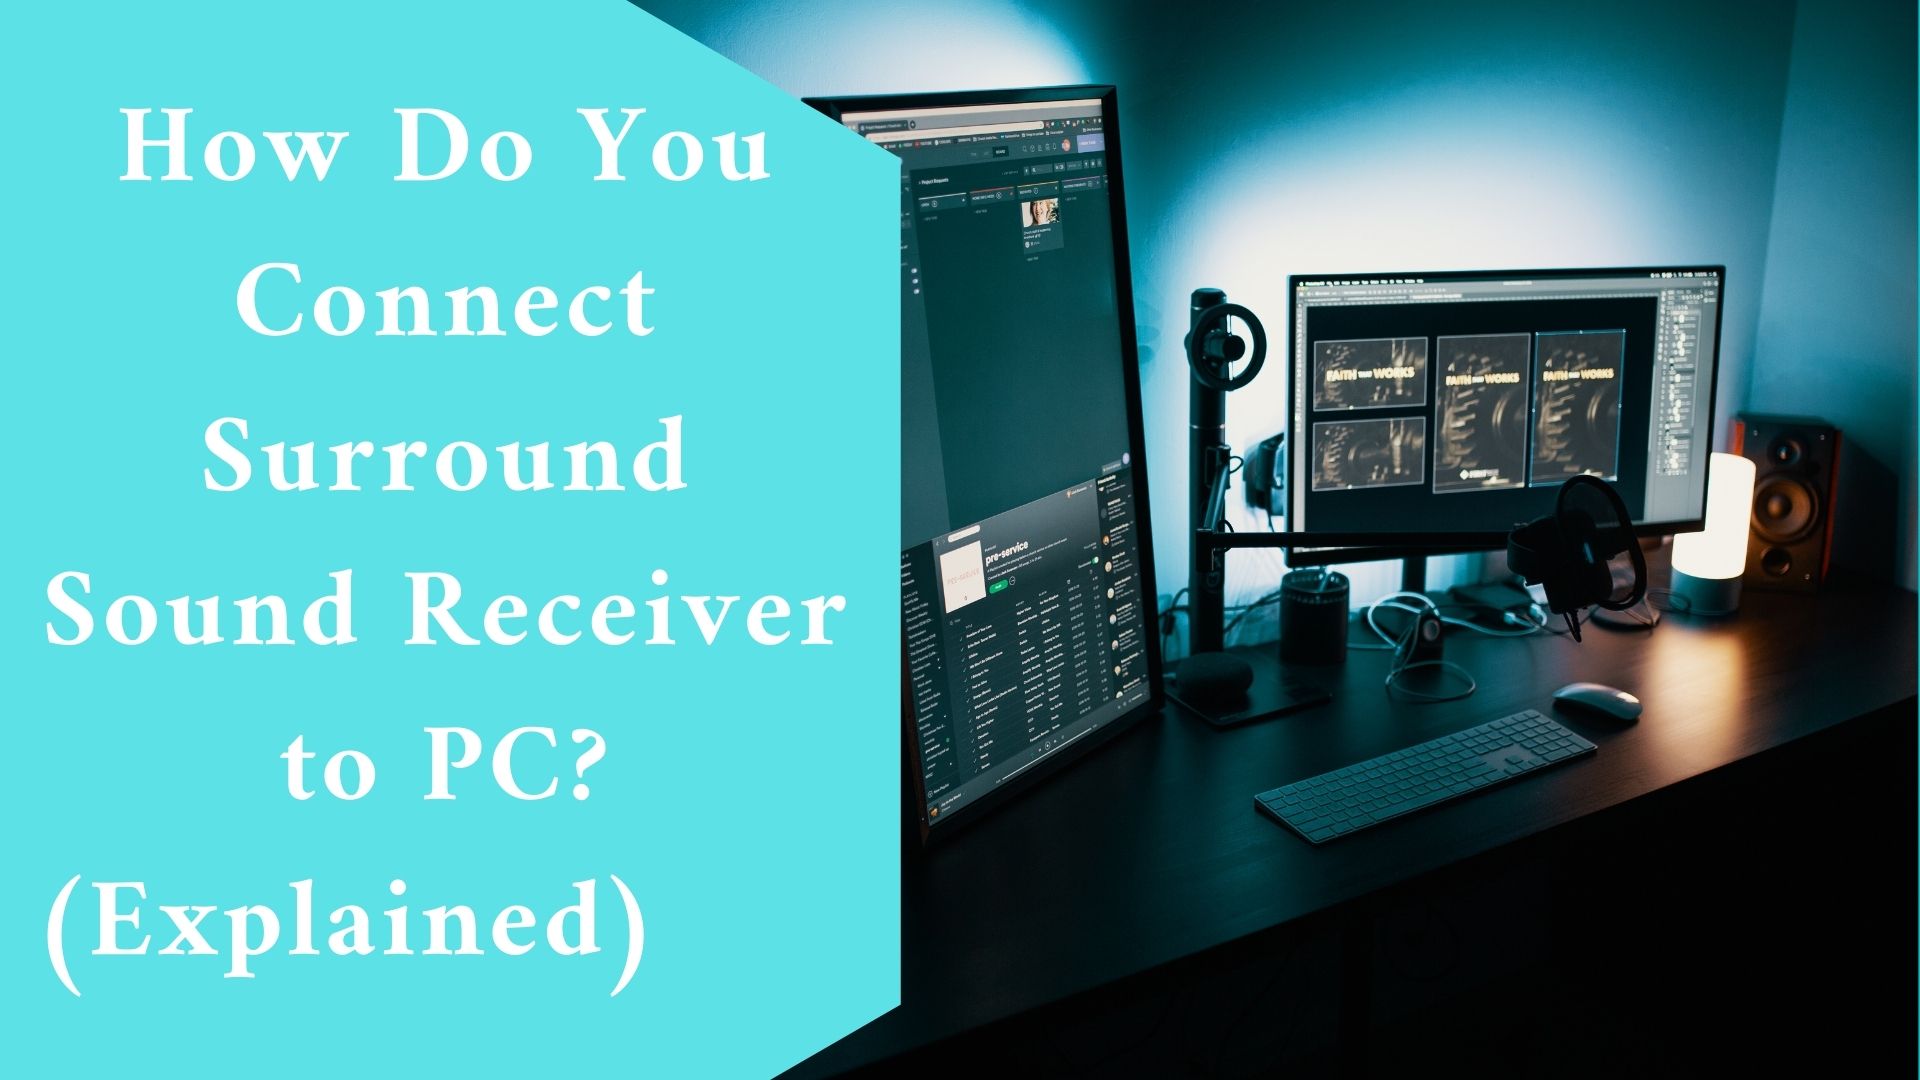 How Do You Connect Surround Sound Receiver to PC? (Explained)